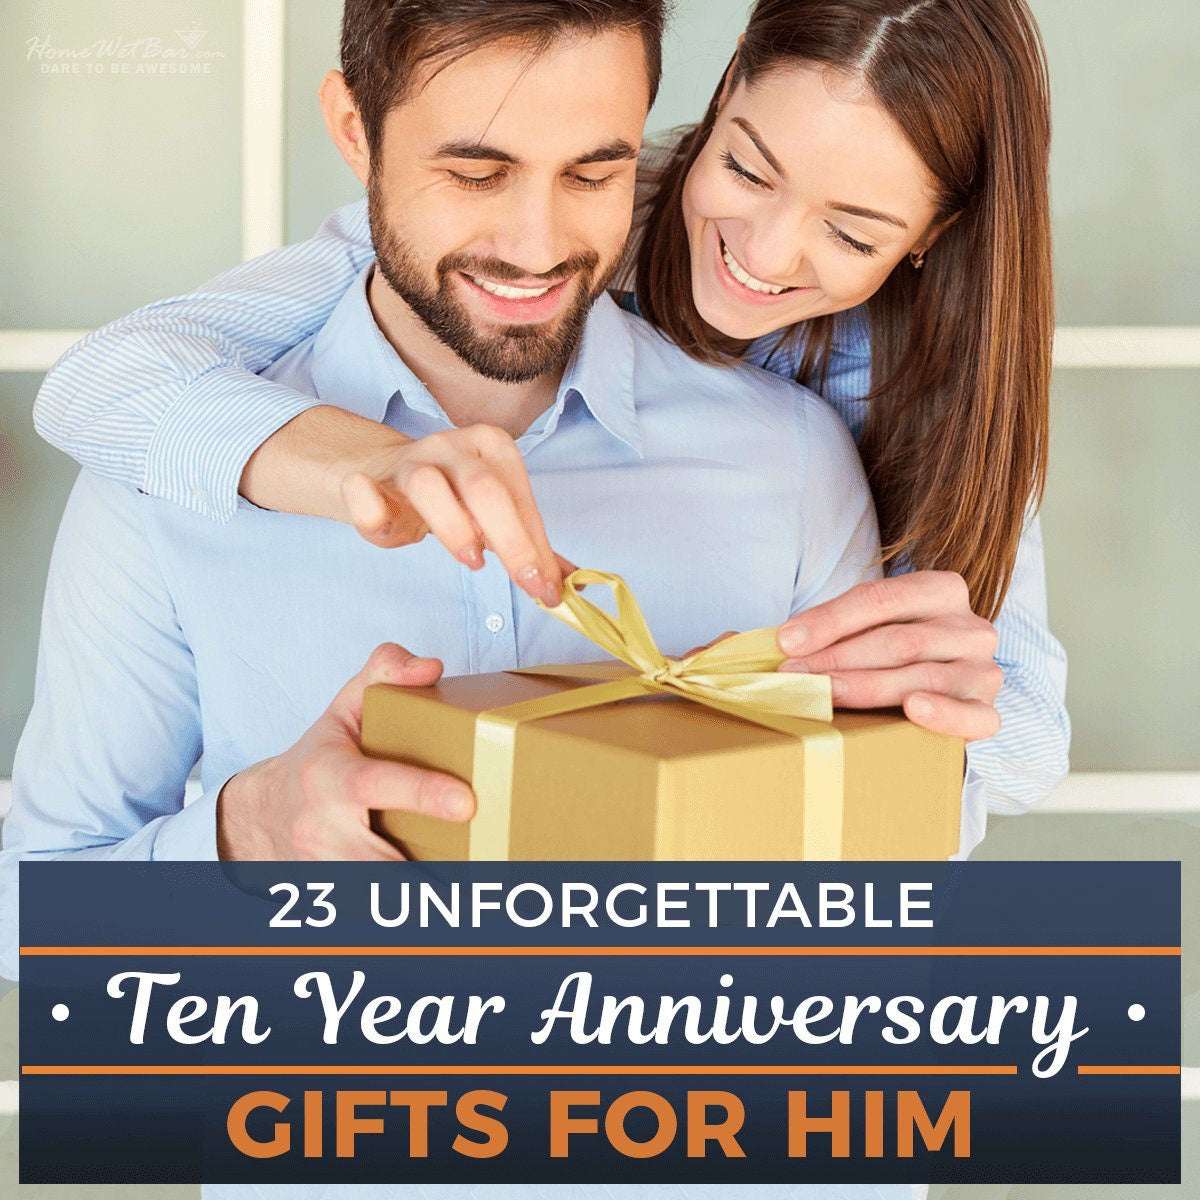 10 gifts for husband